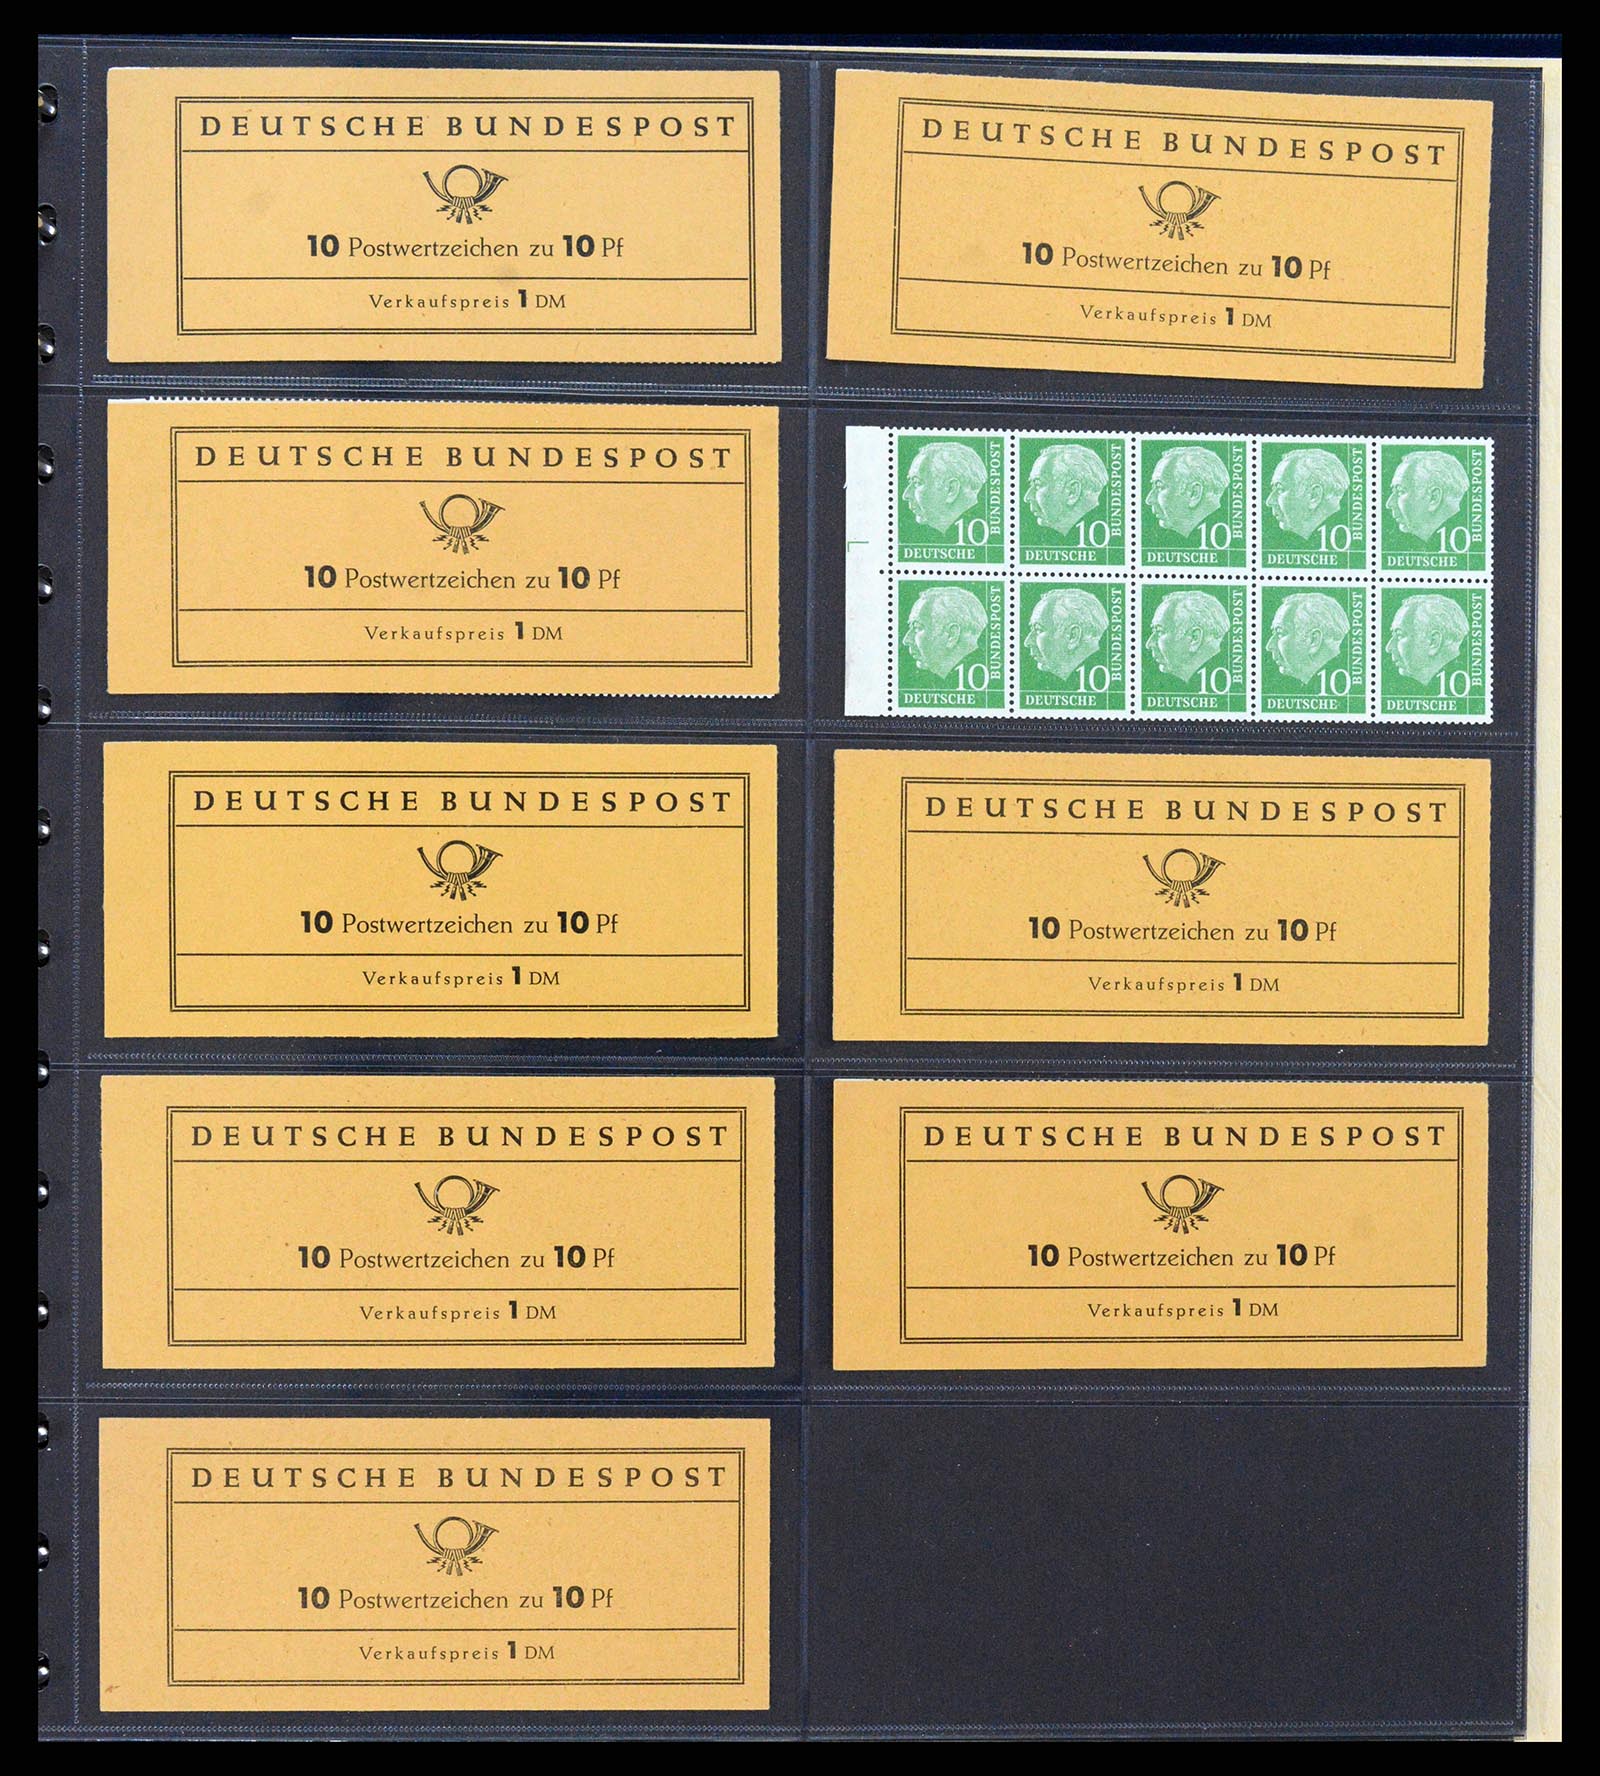 37365 008 - Stamp collection 37365 Bundespost stamp booklets 1951-2001.